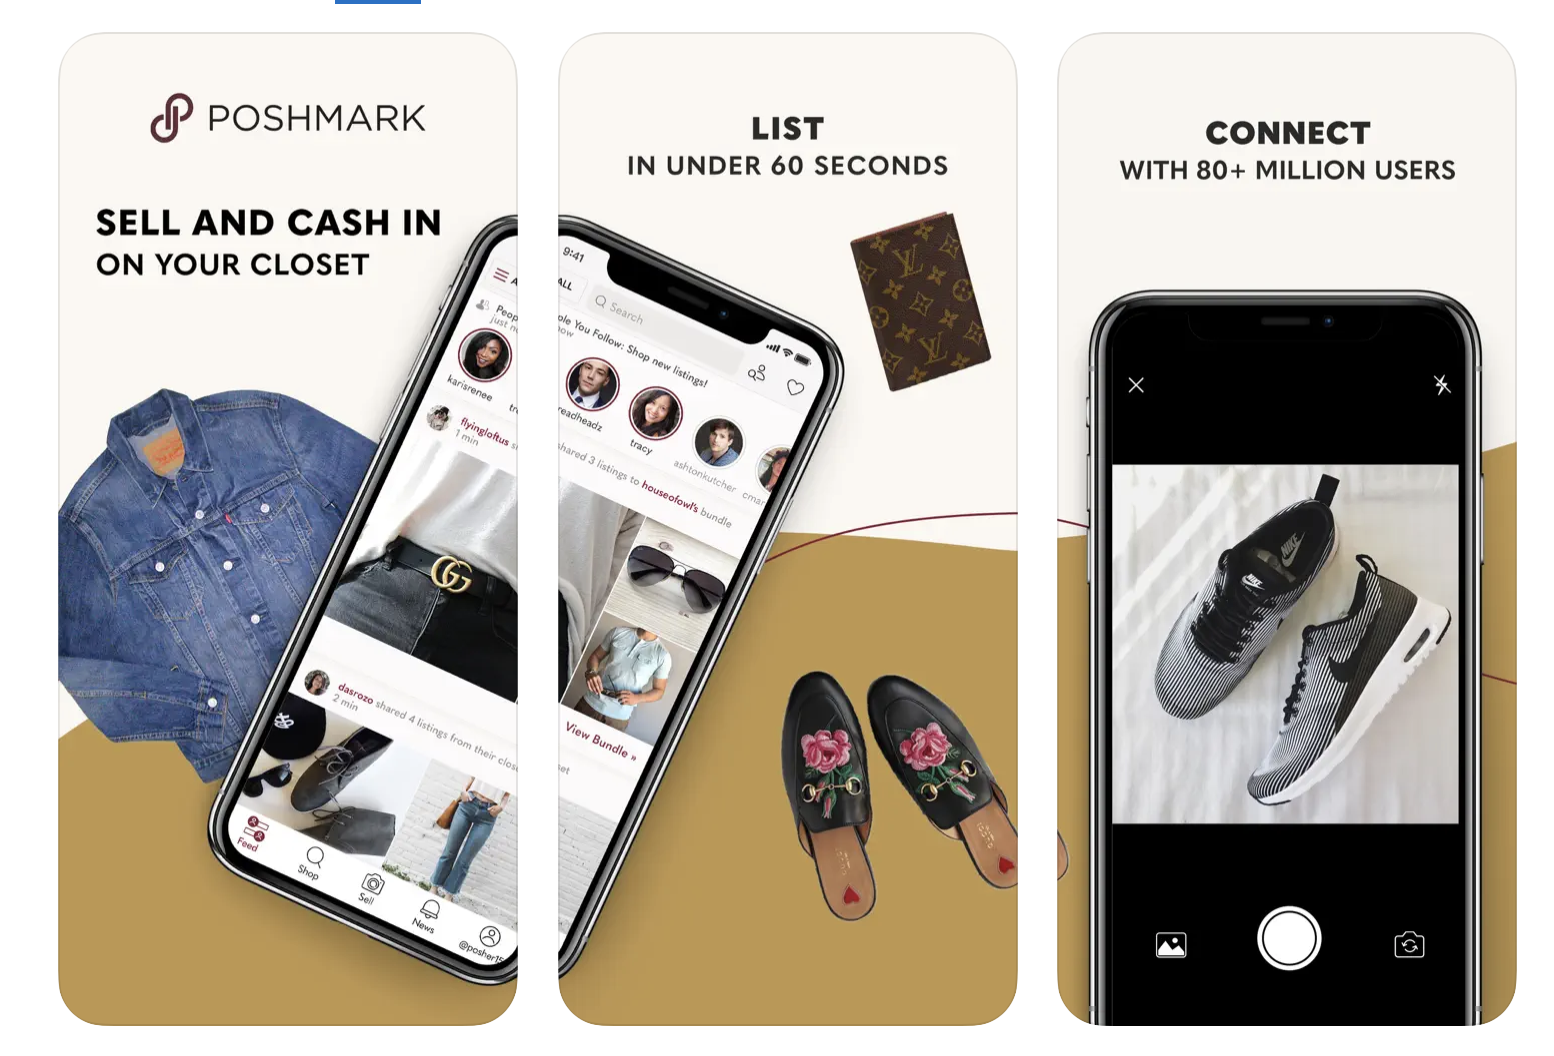  Poshmark: Great app to sell clothes